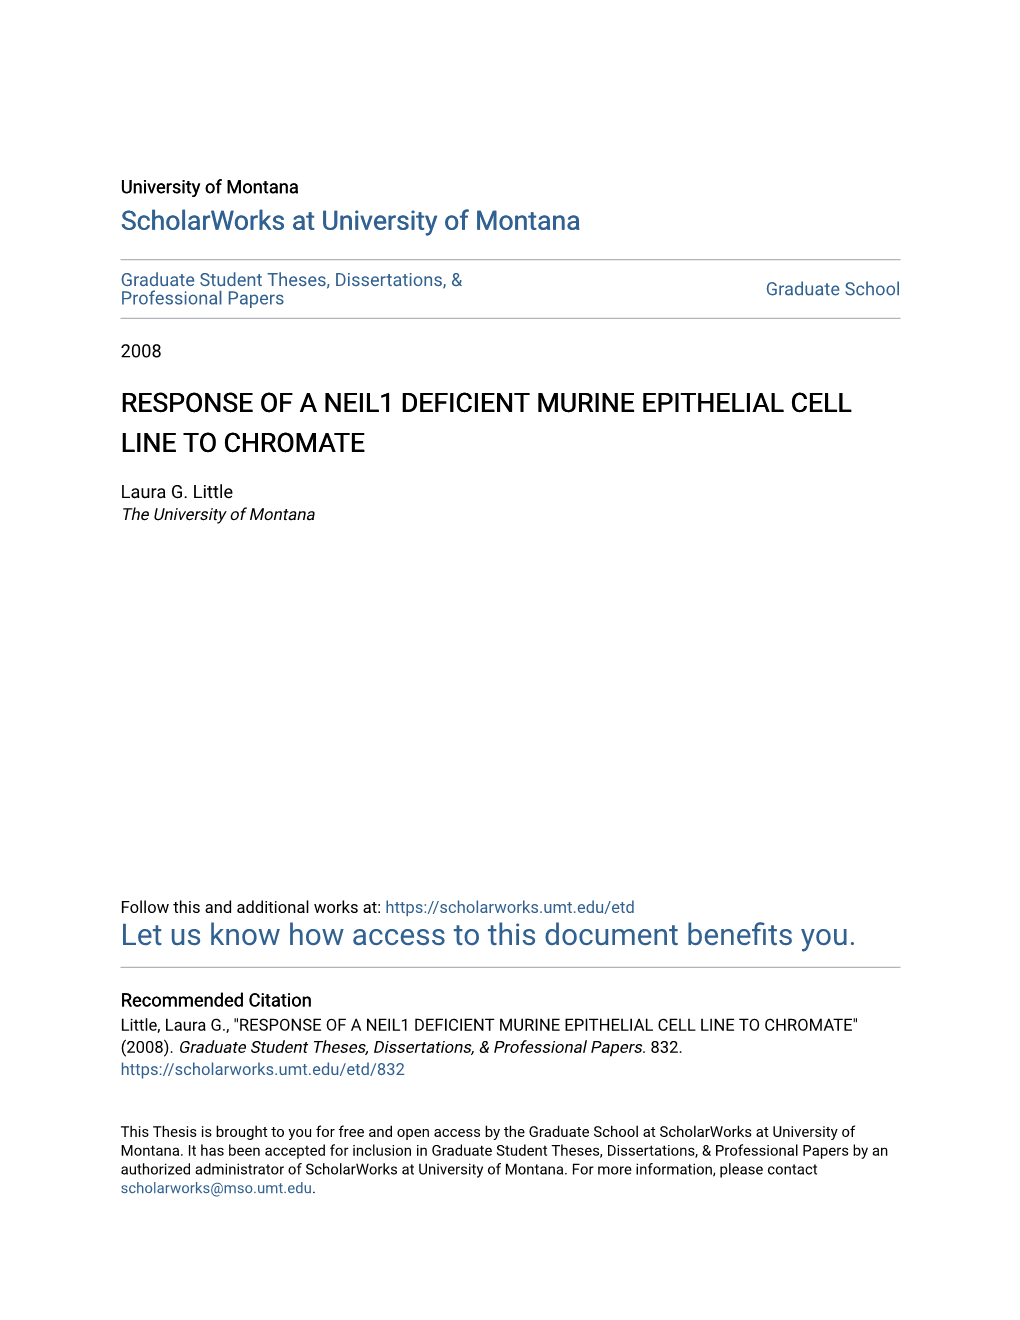 Response of a Neil1 Deficient Murine Epithelial Cell Line to Chromate